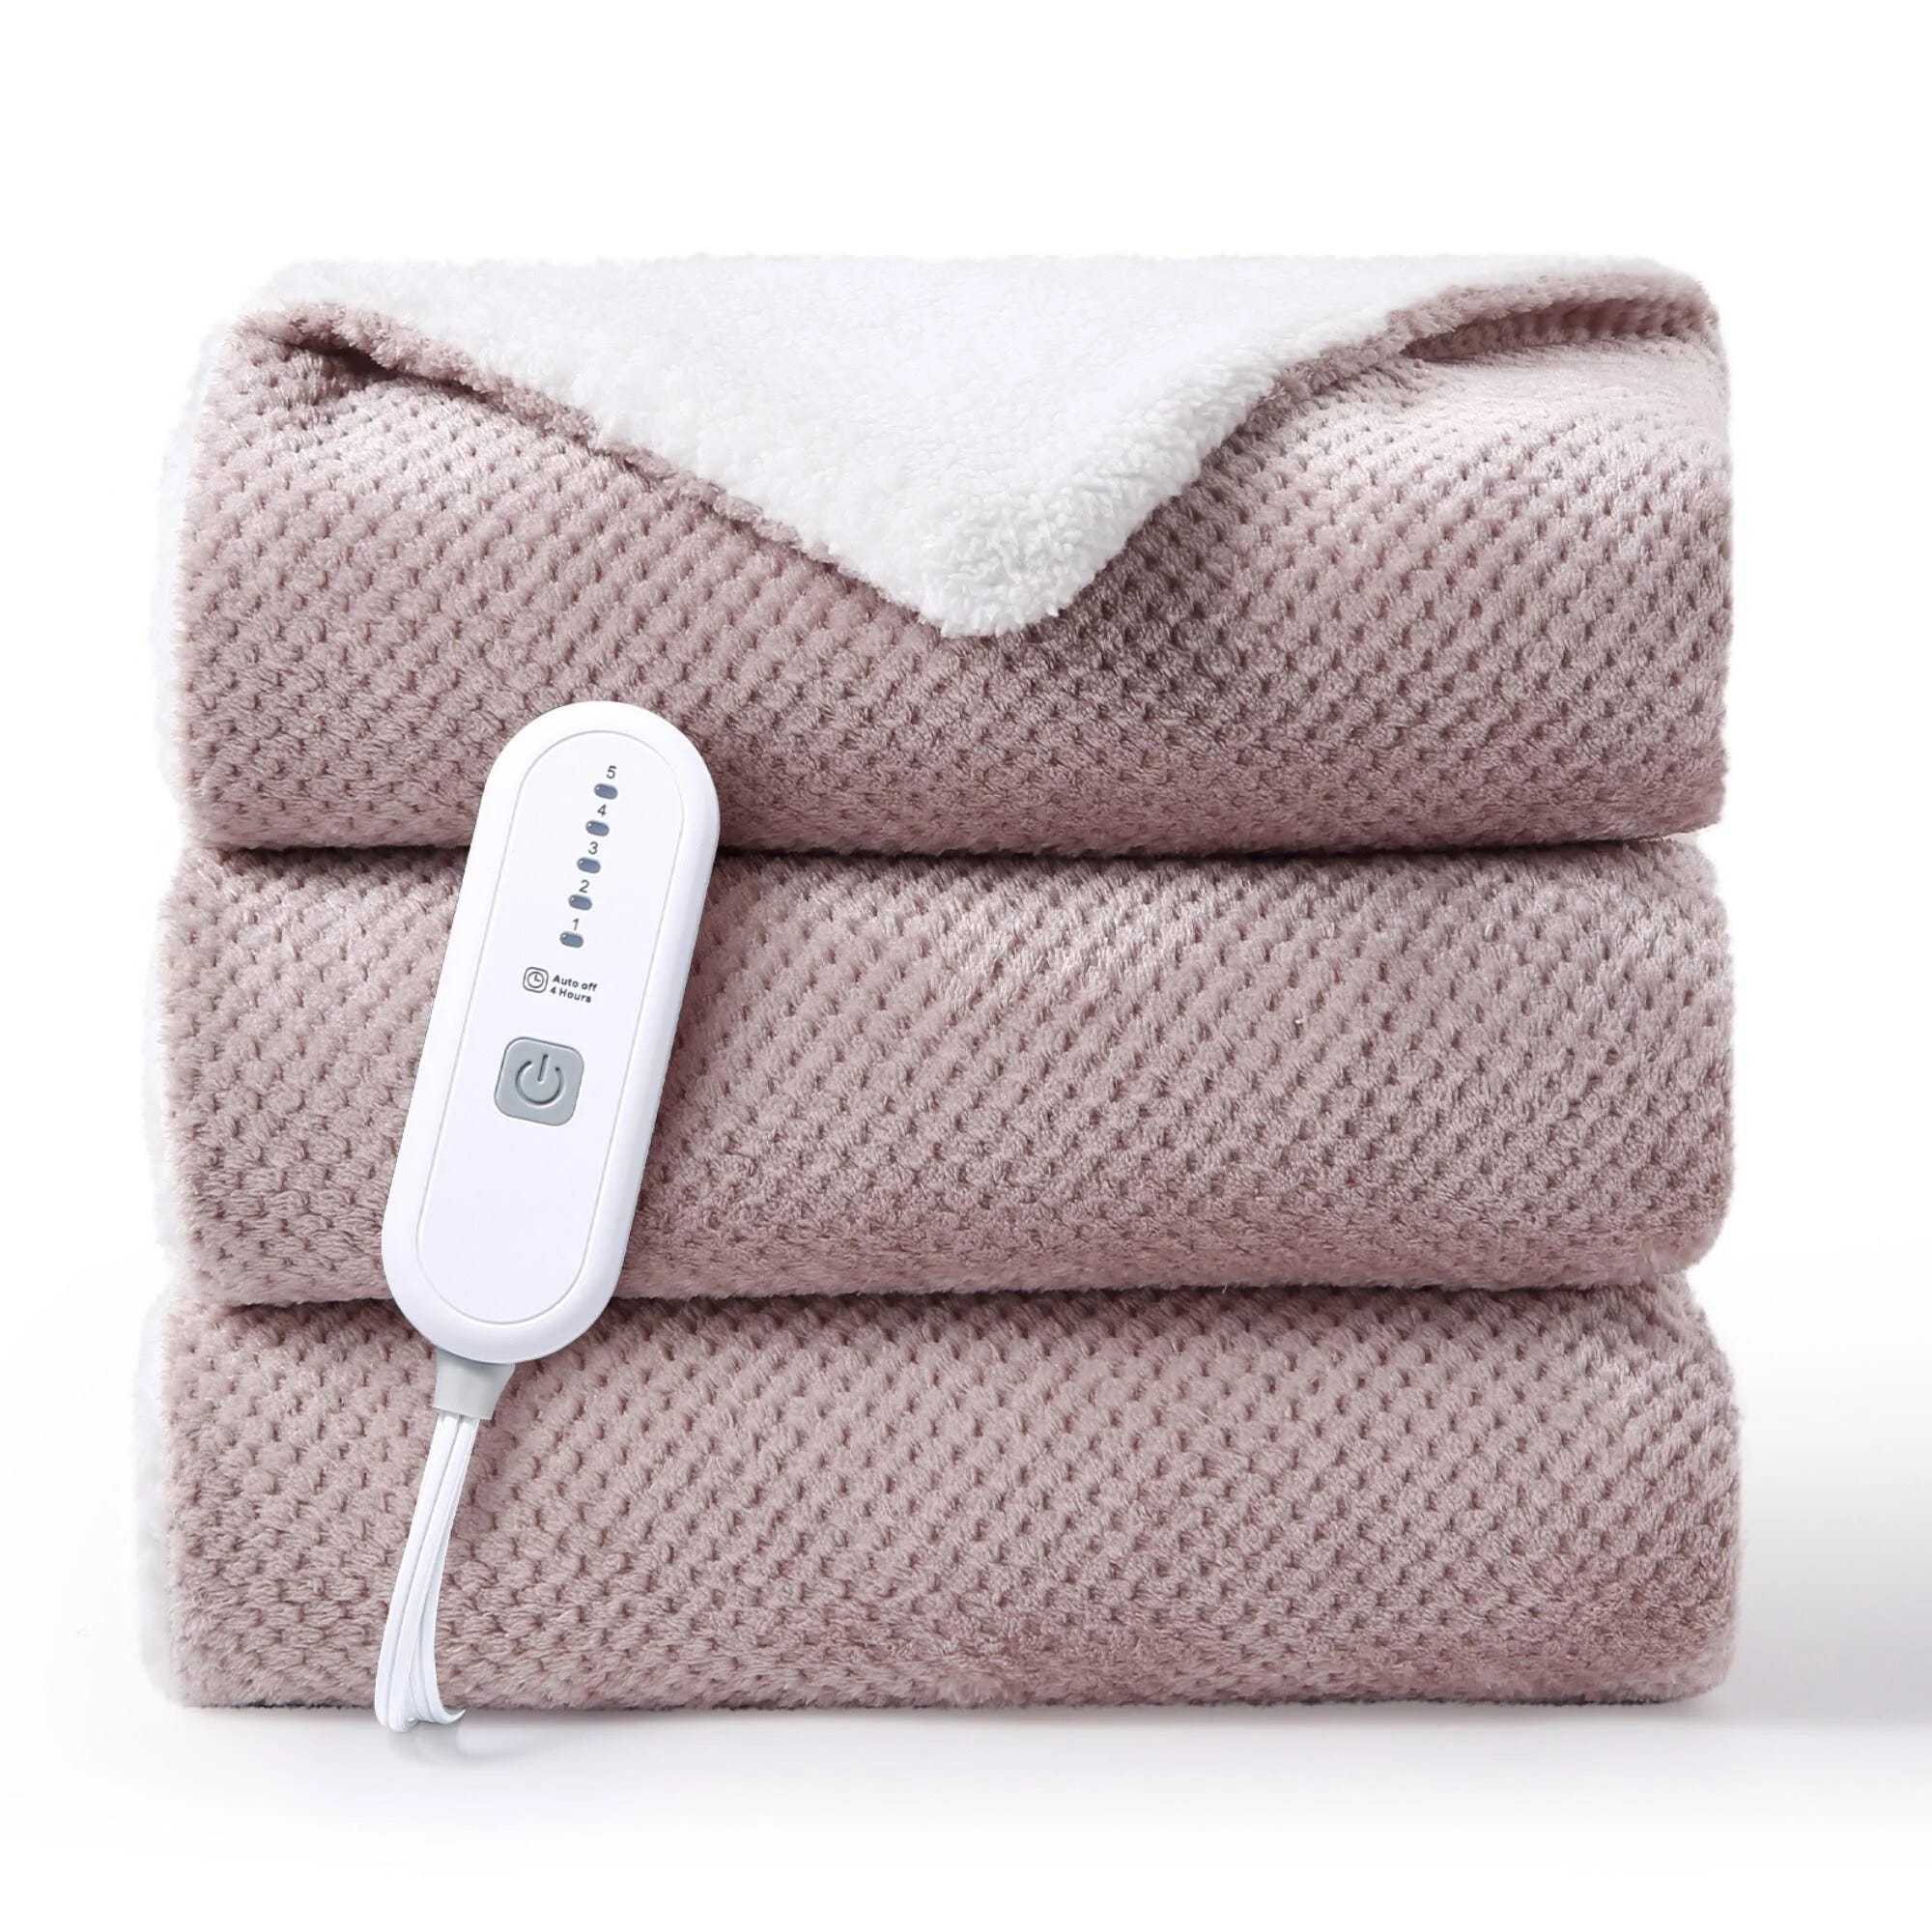 Cozy Electric Flannel Throw Blanket for Winter Comfort | Image